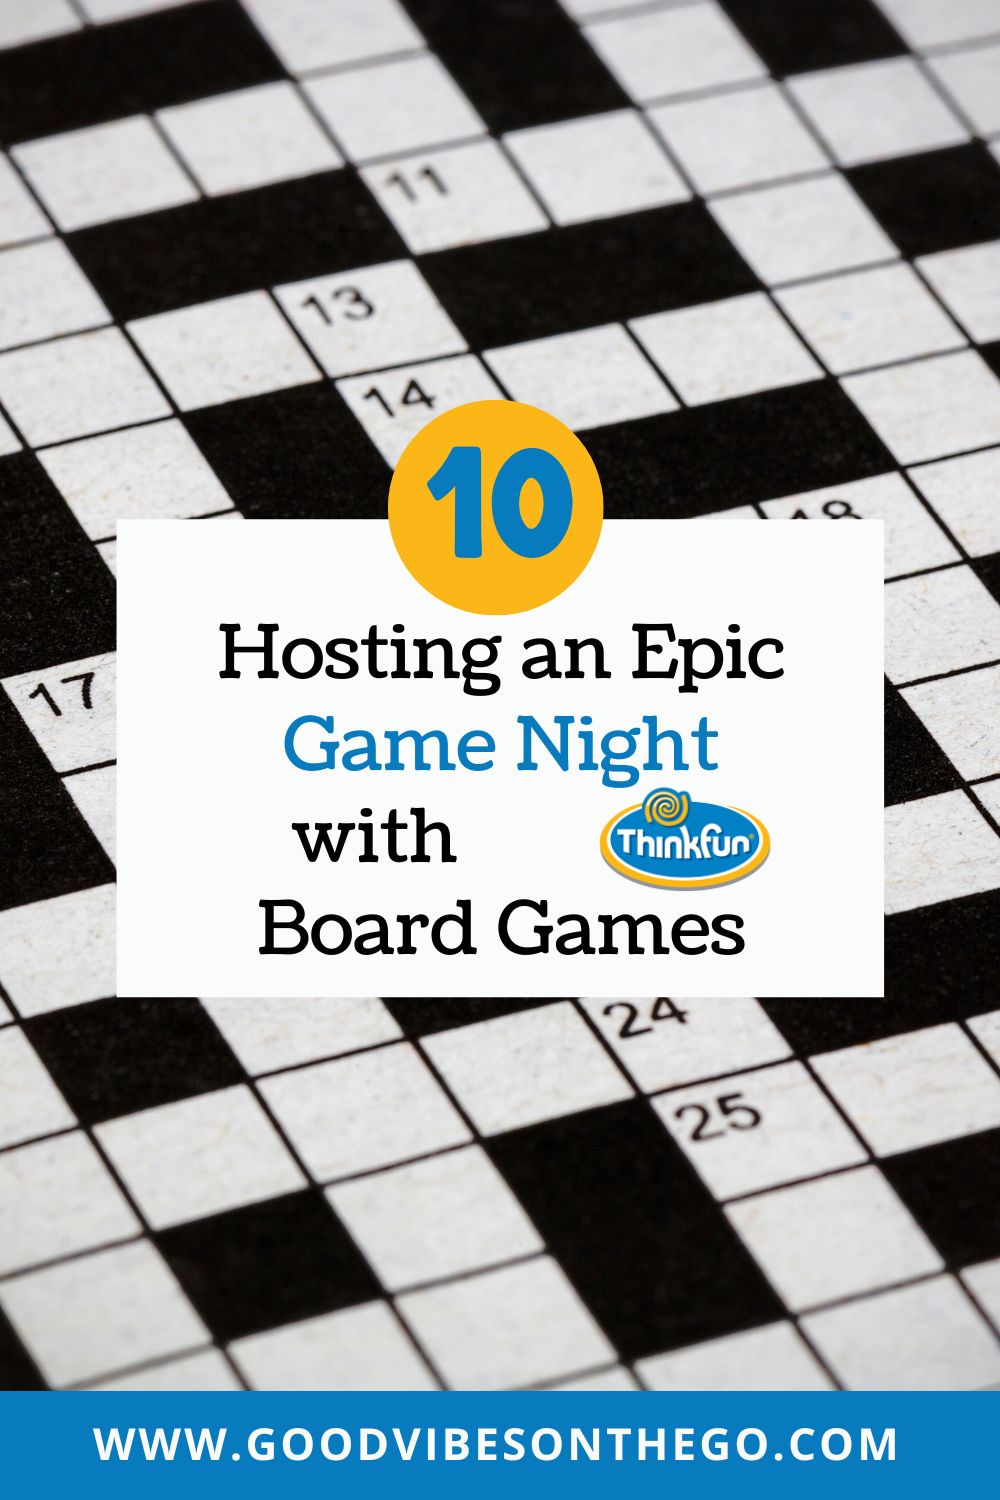 Hosting an Epic Game Night with ThinkFun Board Games